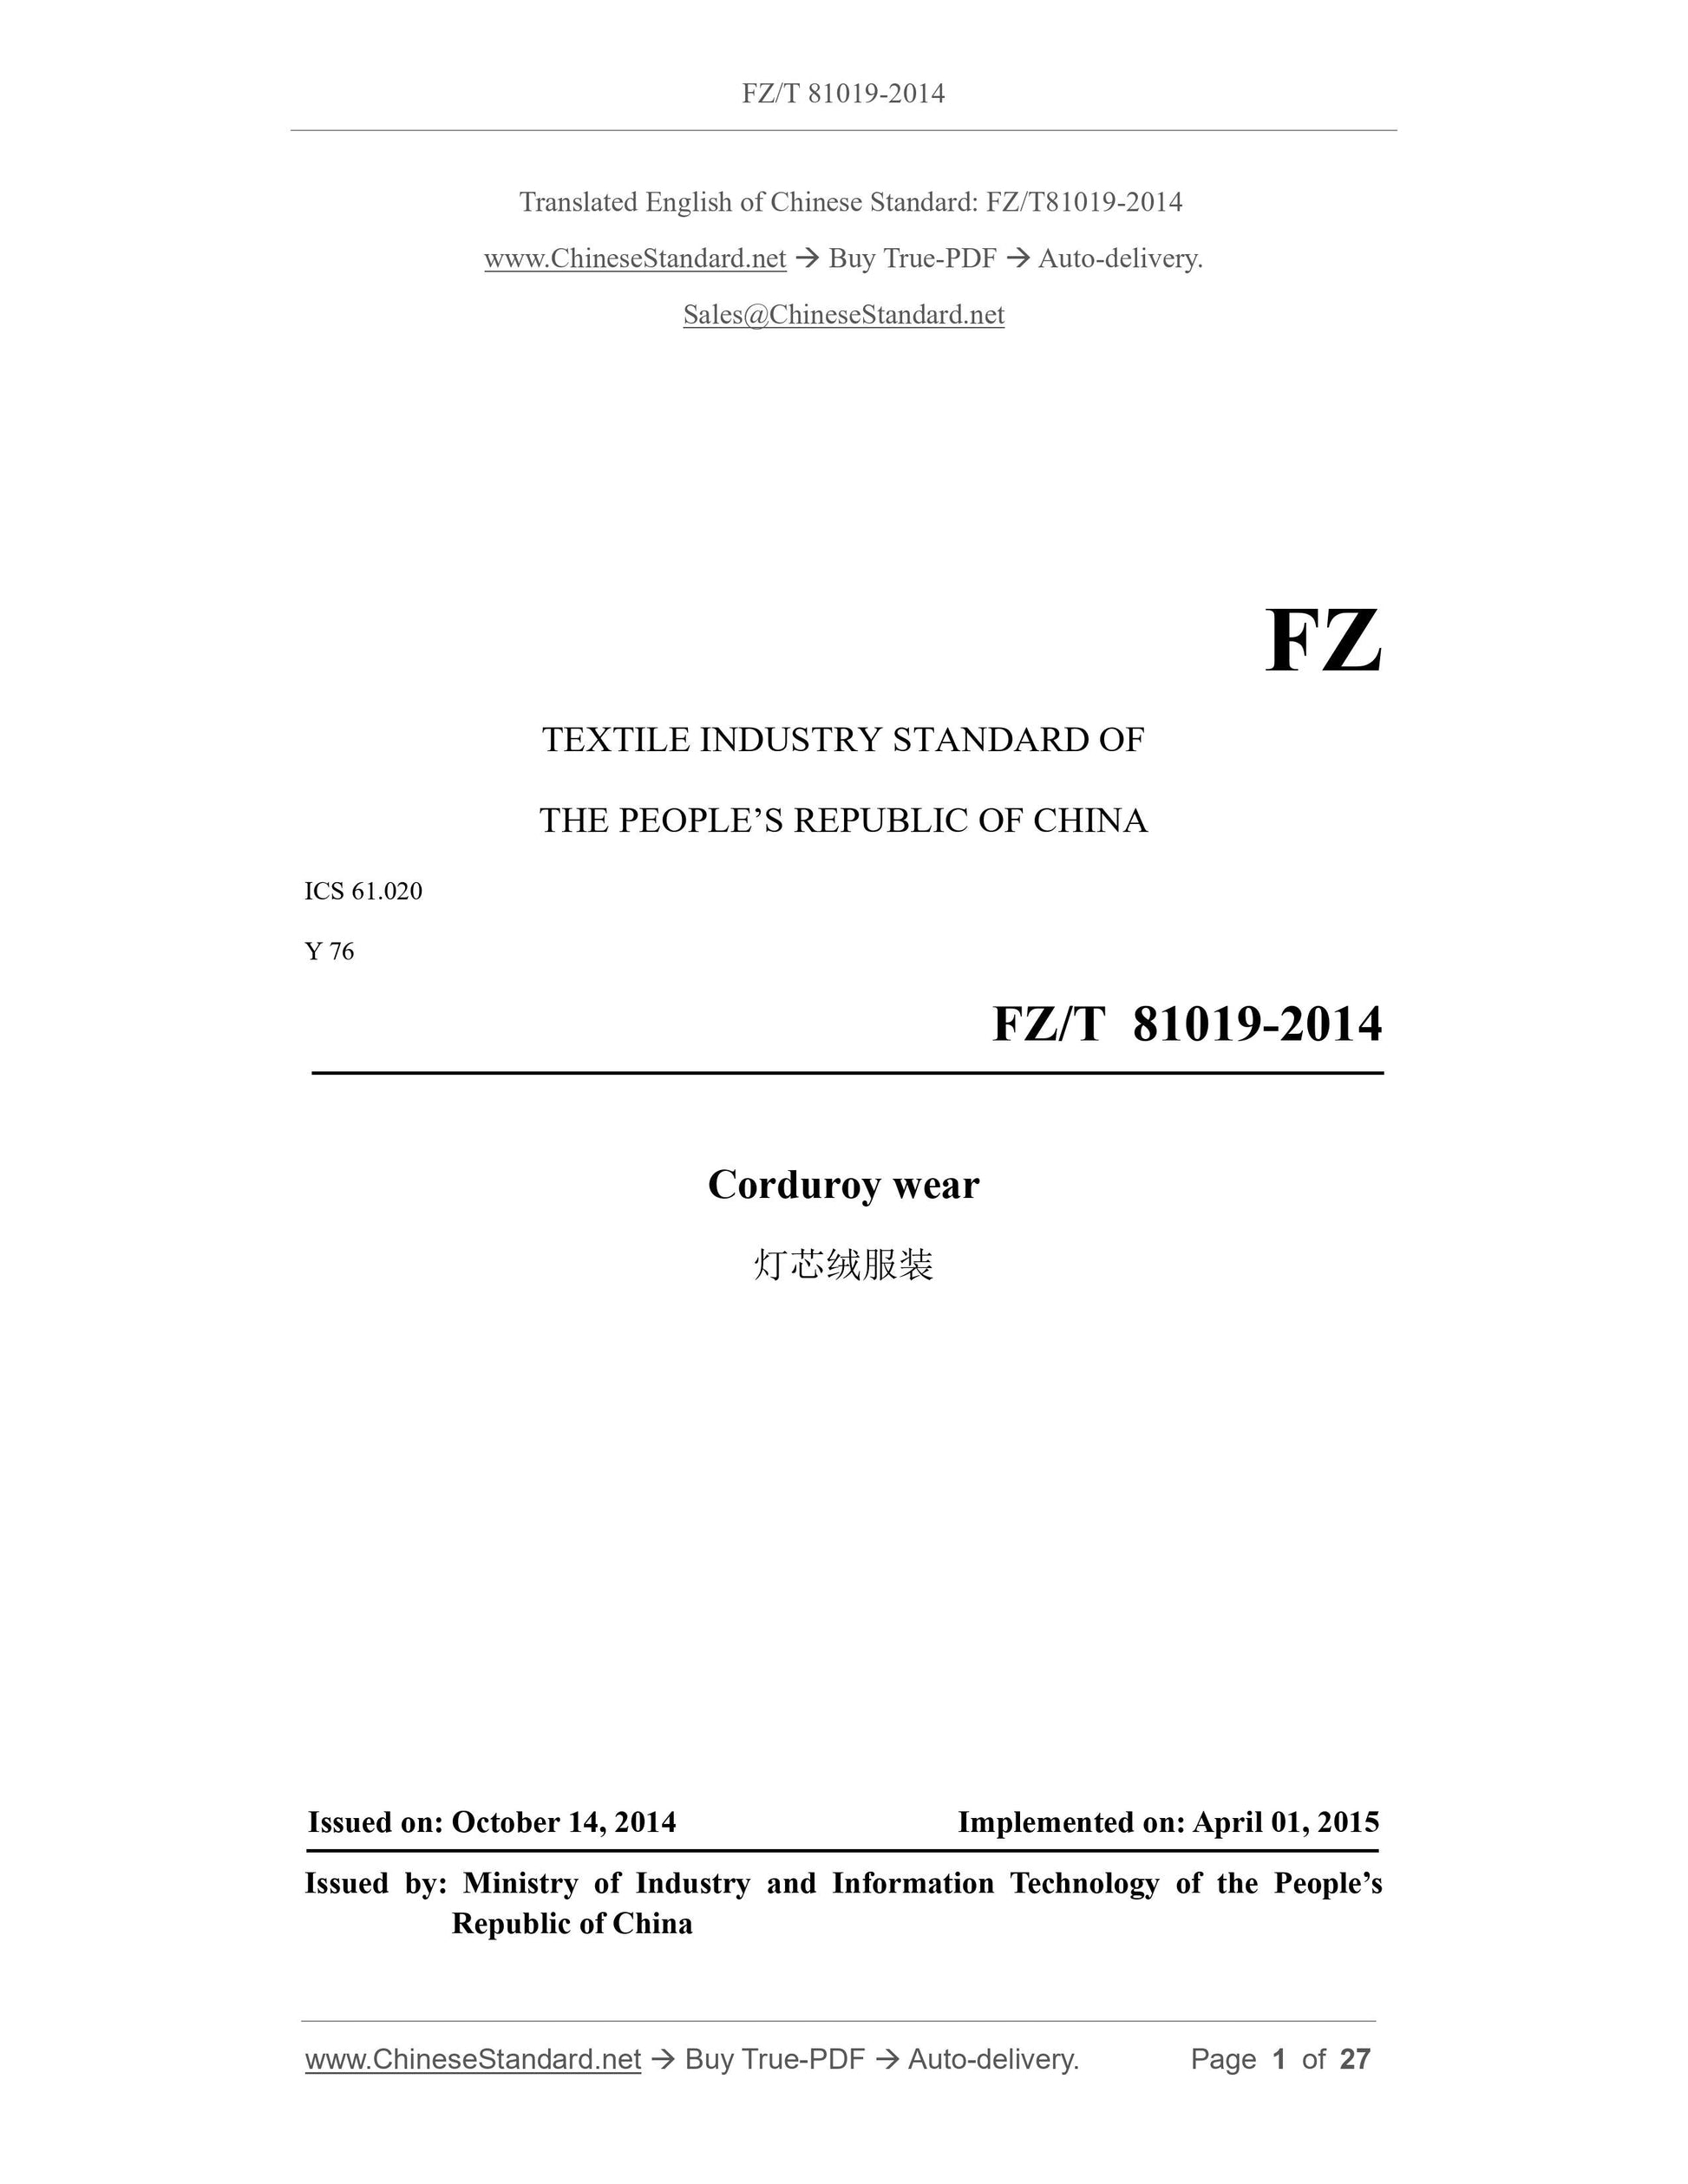 FZ/T 81019-2014 Page 1